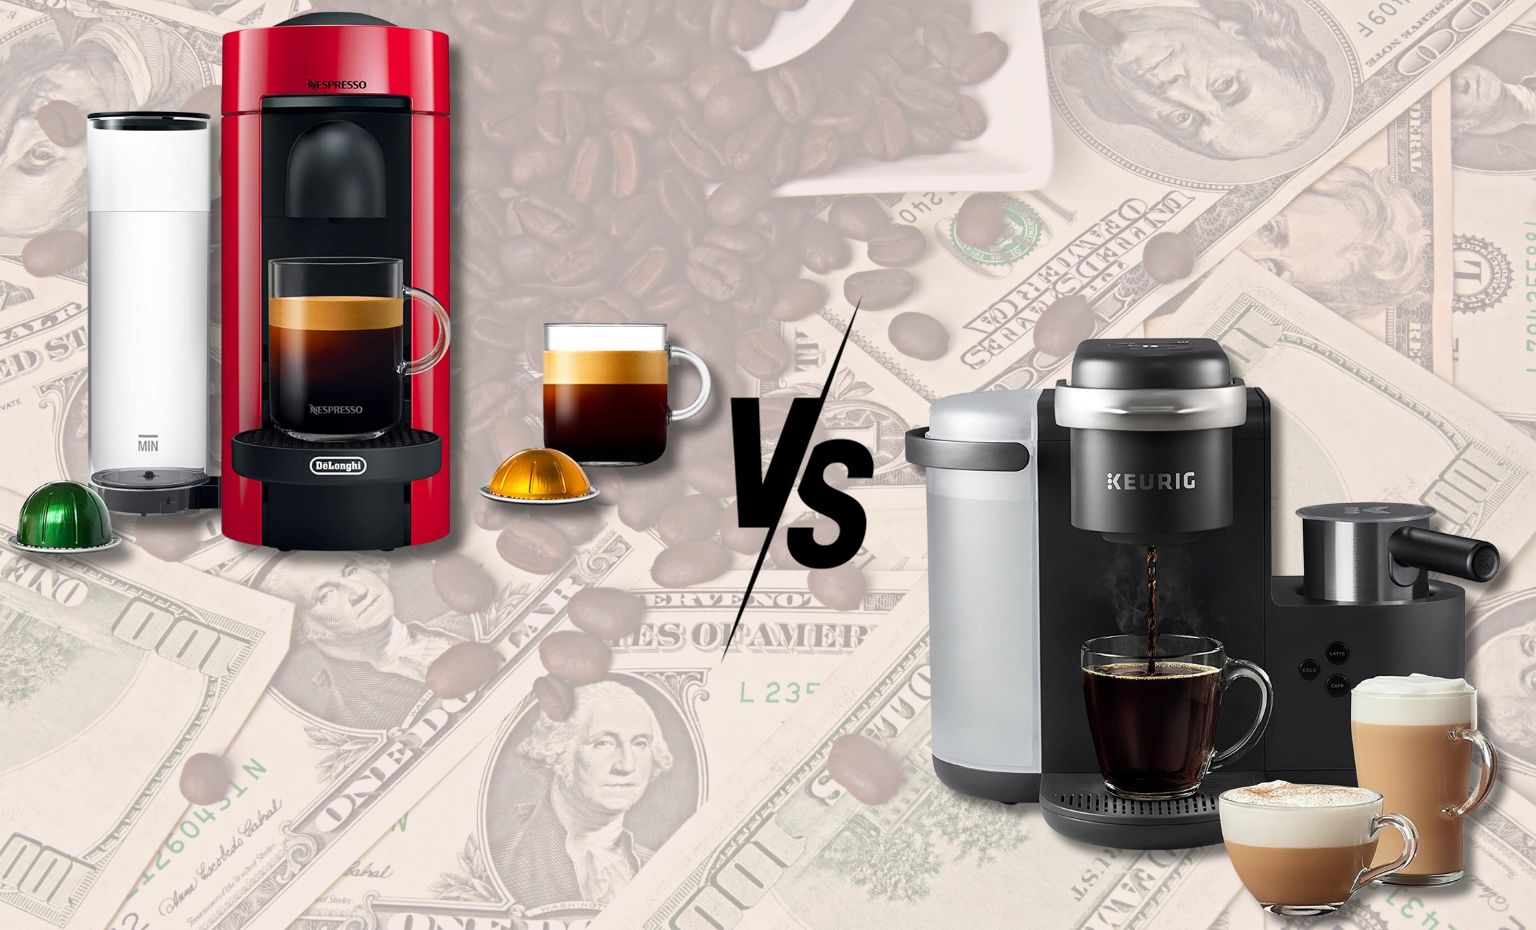 Nespresso vs Keurig cost difference